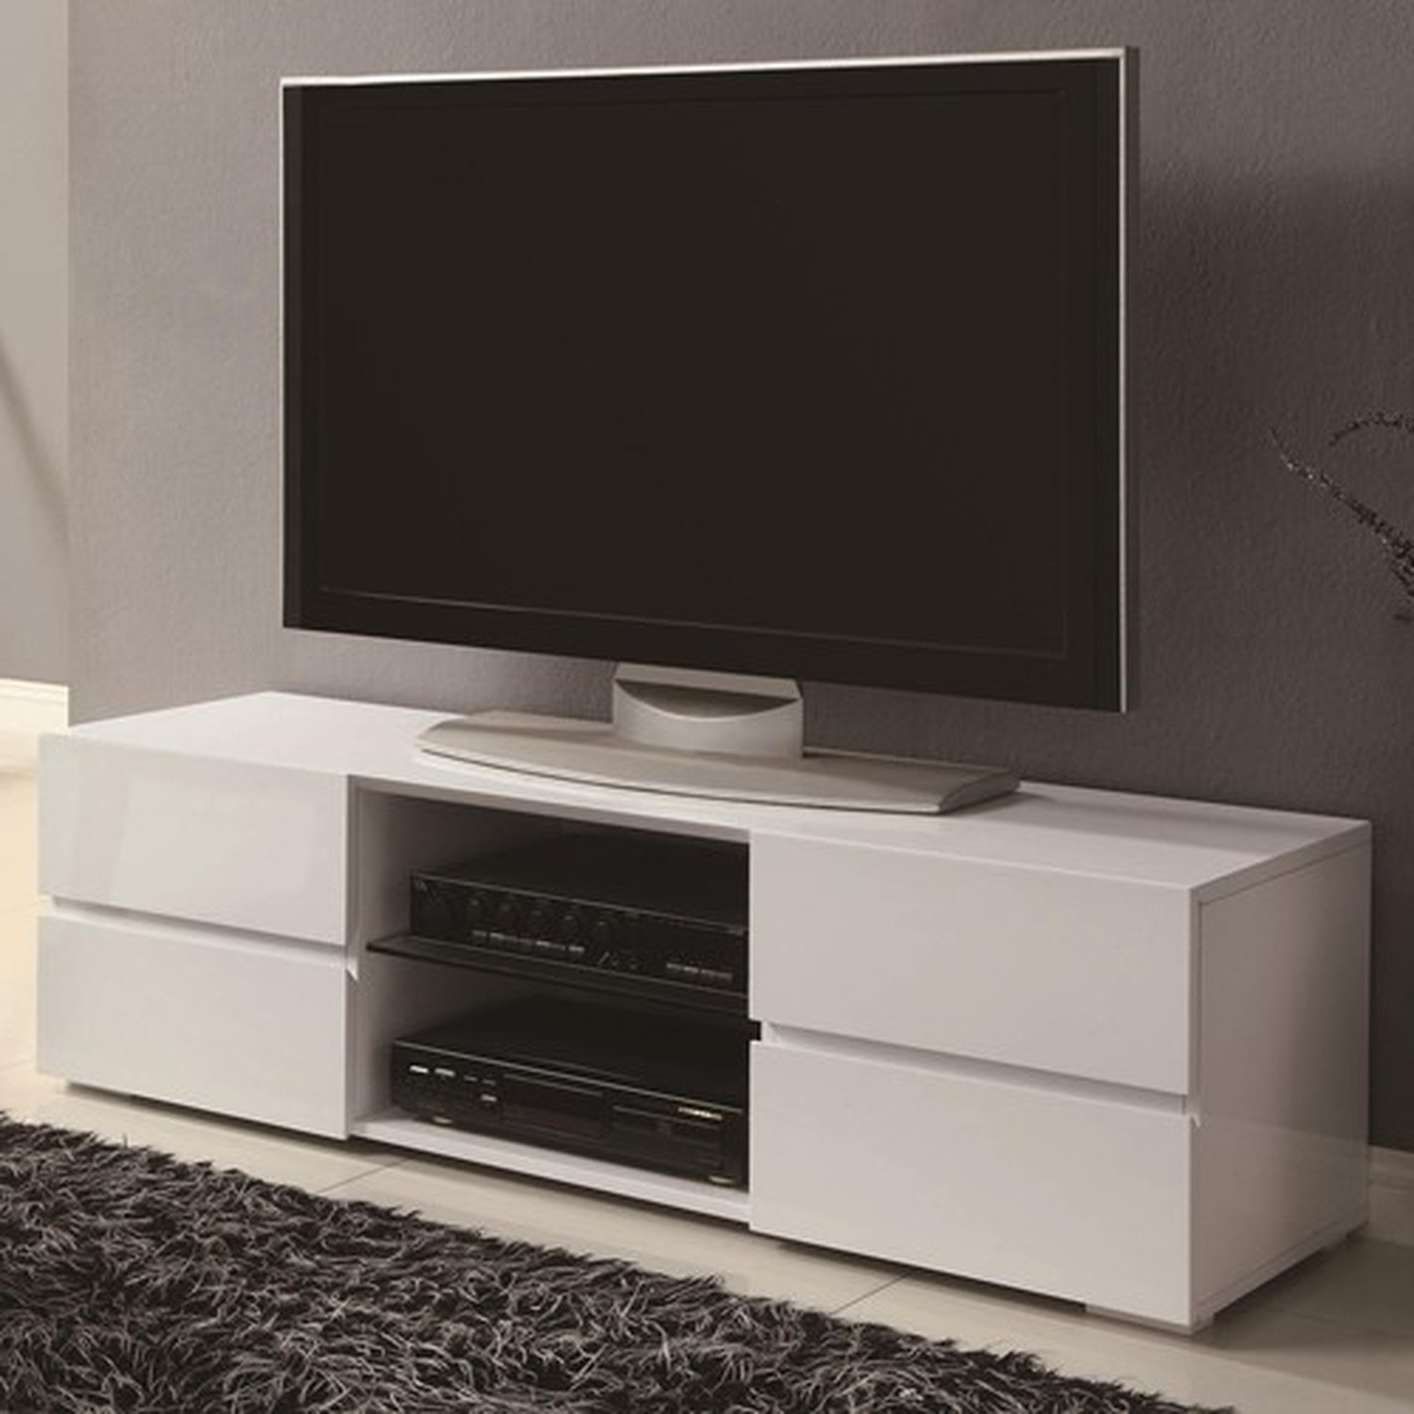 White Wood Tv Stand – Steal A Sofa Furniture Outlet Los Angeles Ca For White Wood Tv Stands (View 1 of 15)